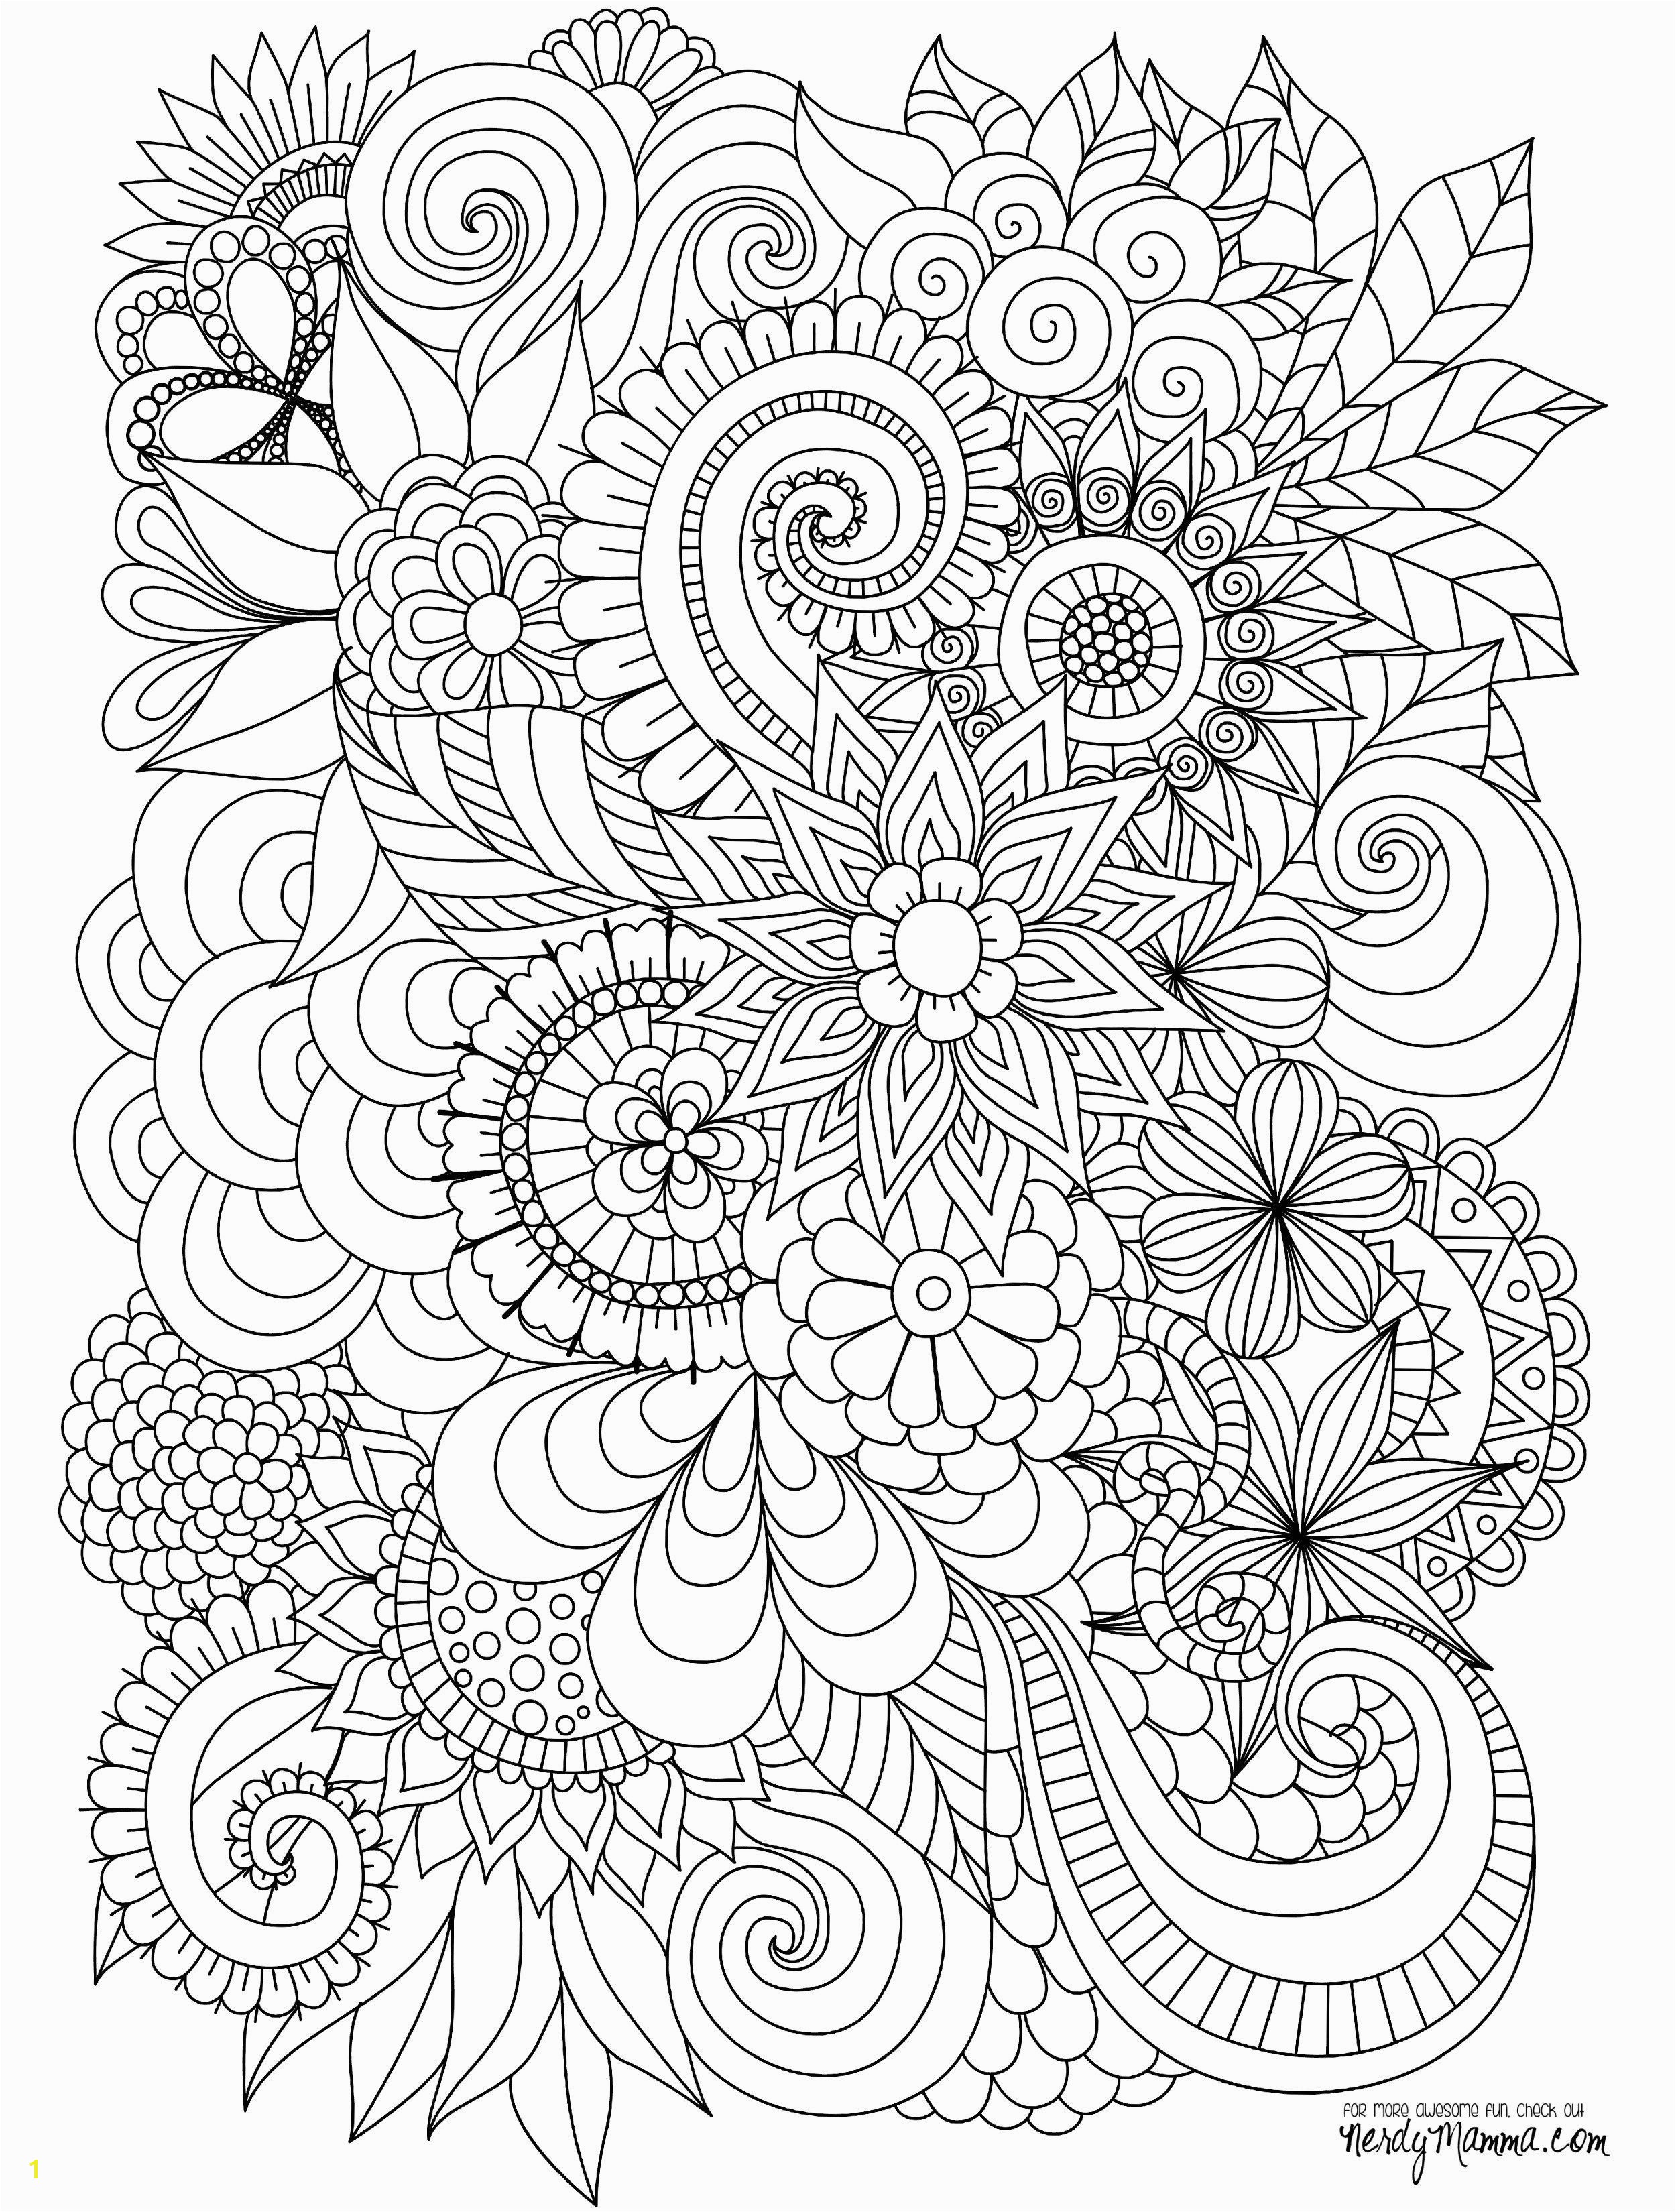 Back to the Future Coloring Pages Flowers Abstract Coloring Pages Colouring Adult Detailed Advanced